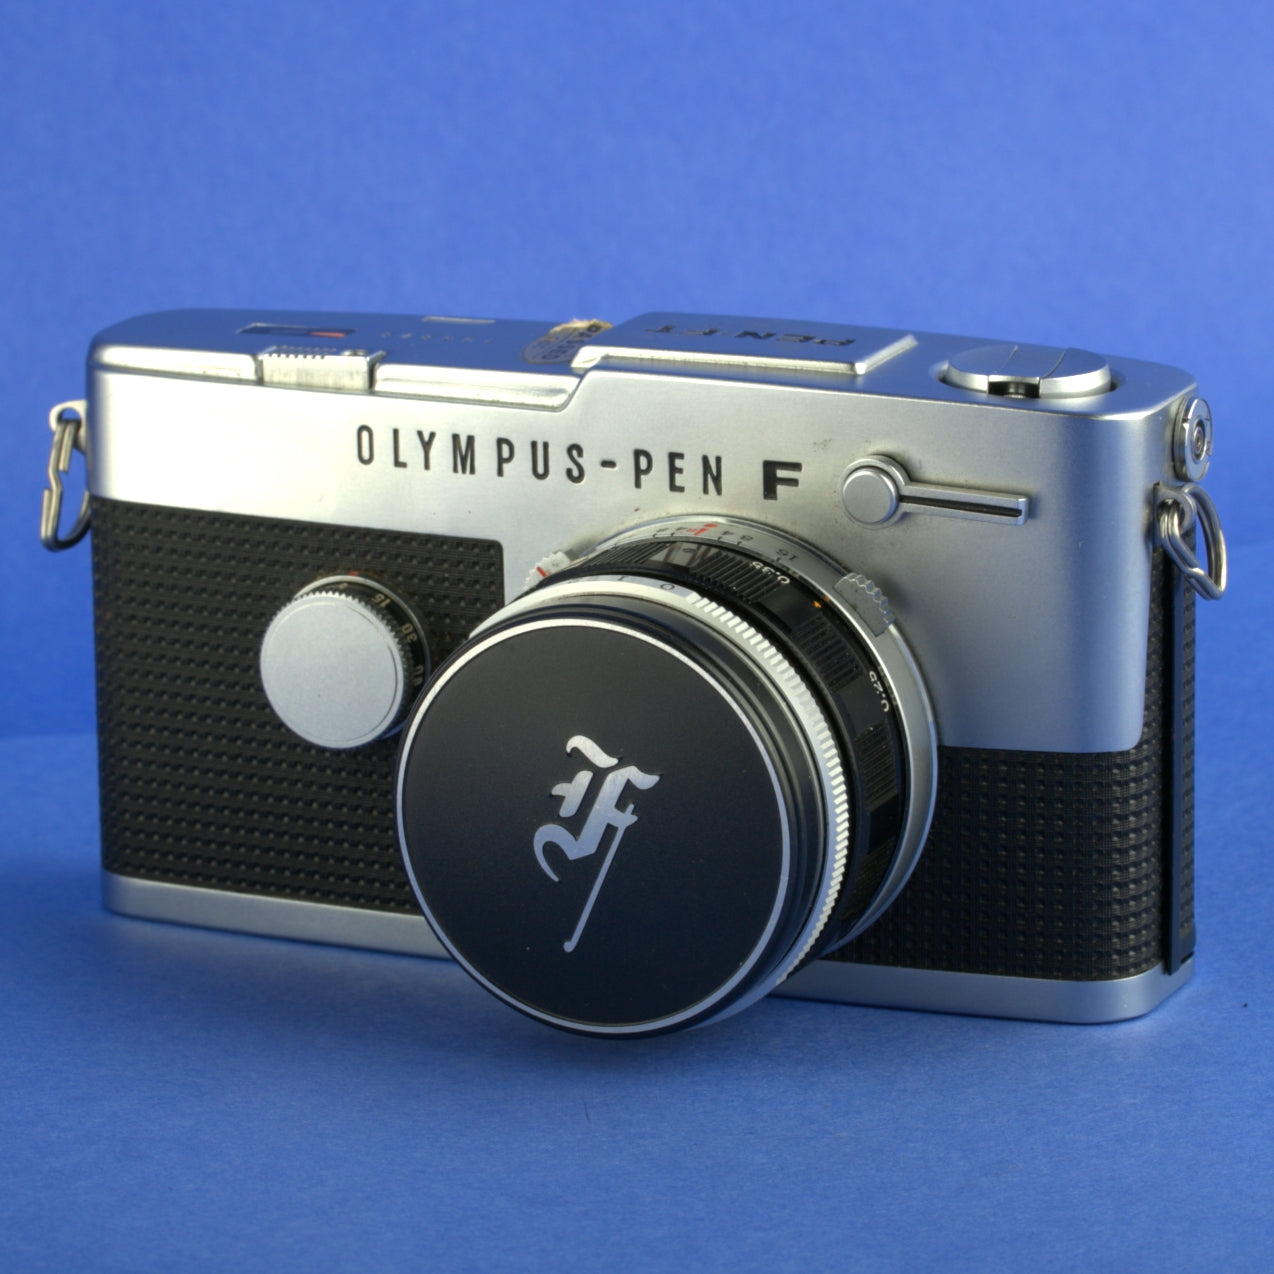 Olympus Pen-FT Film Camera with 25mm F4 Lens Beautiful Condition